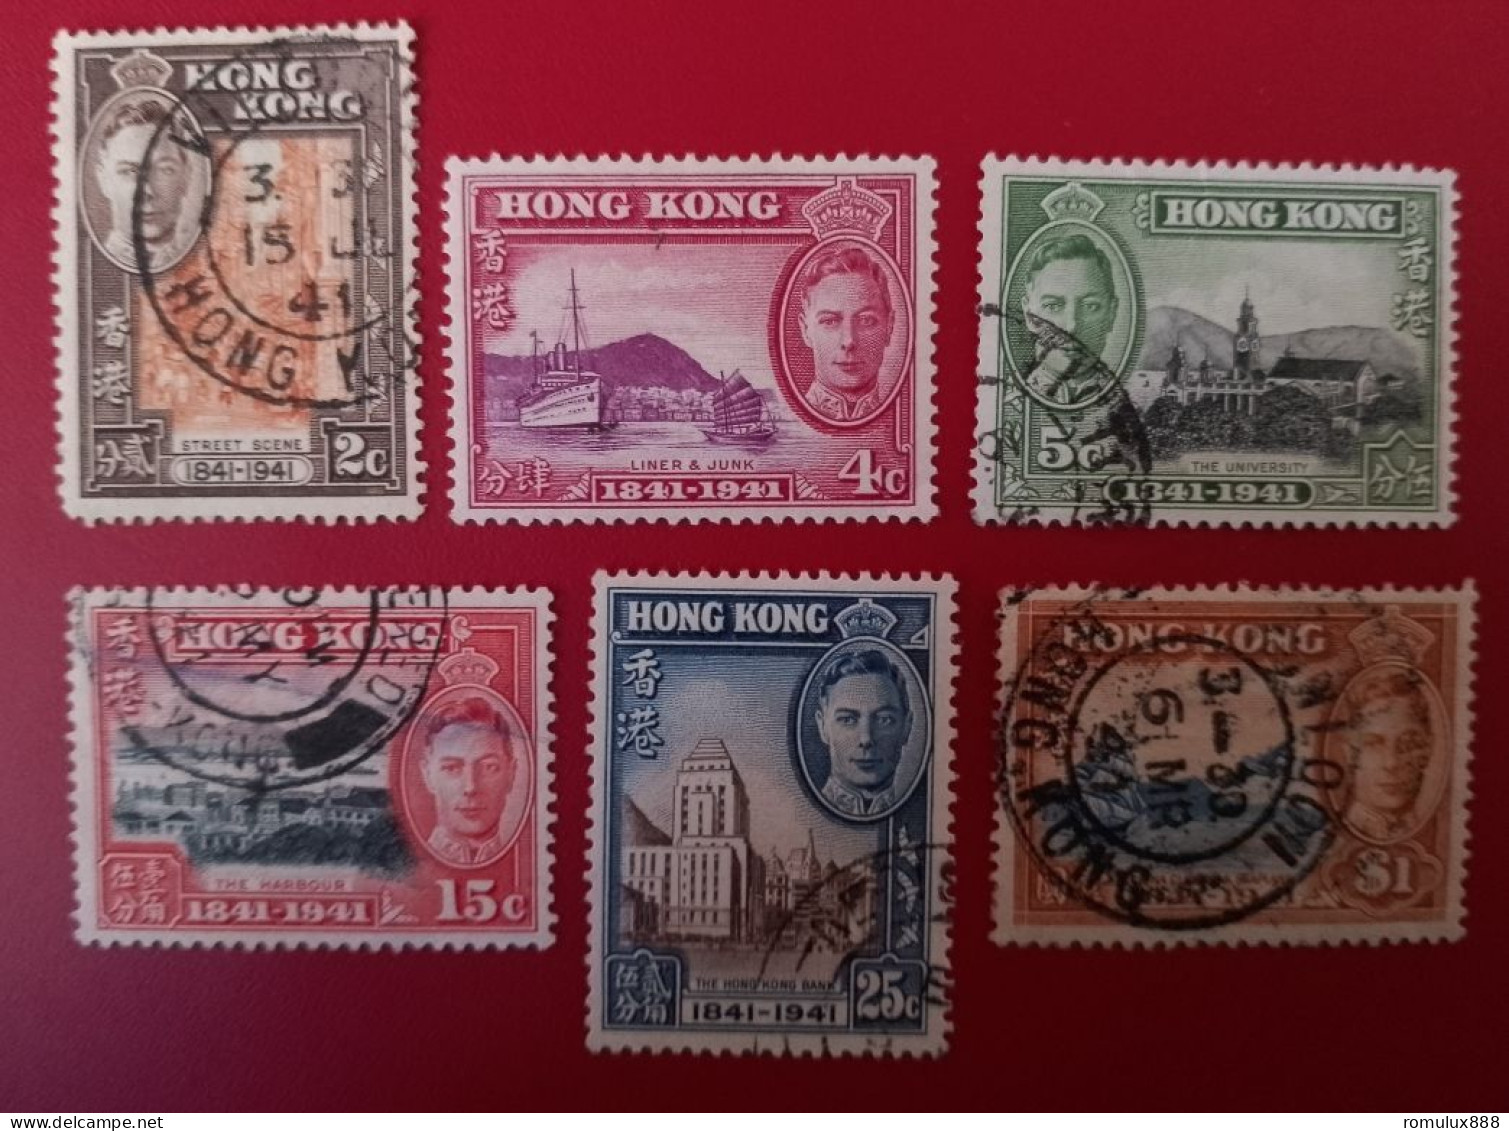 HONG KONG 1941 Full Set 100th Aniversary Of Colony - Used Stamps